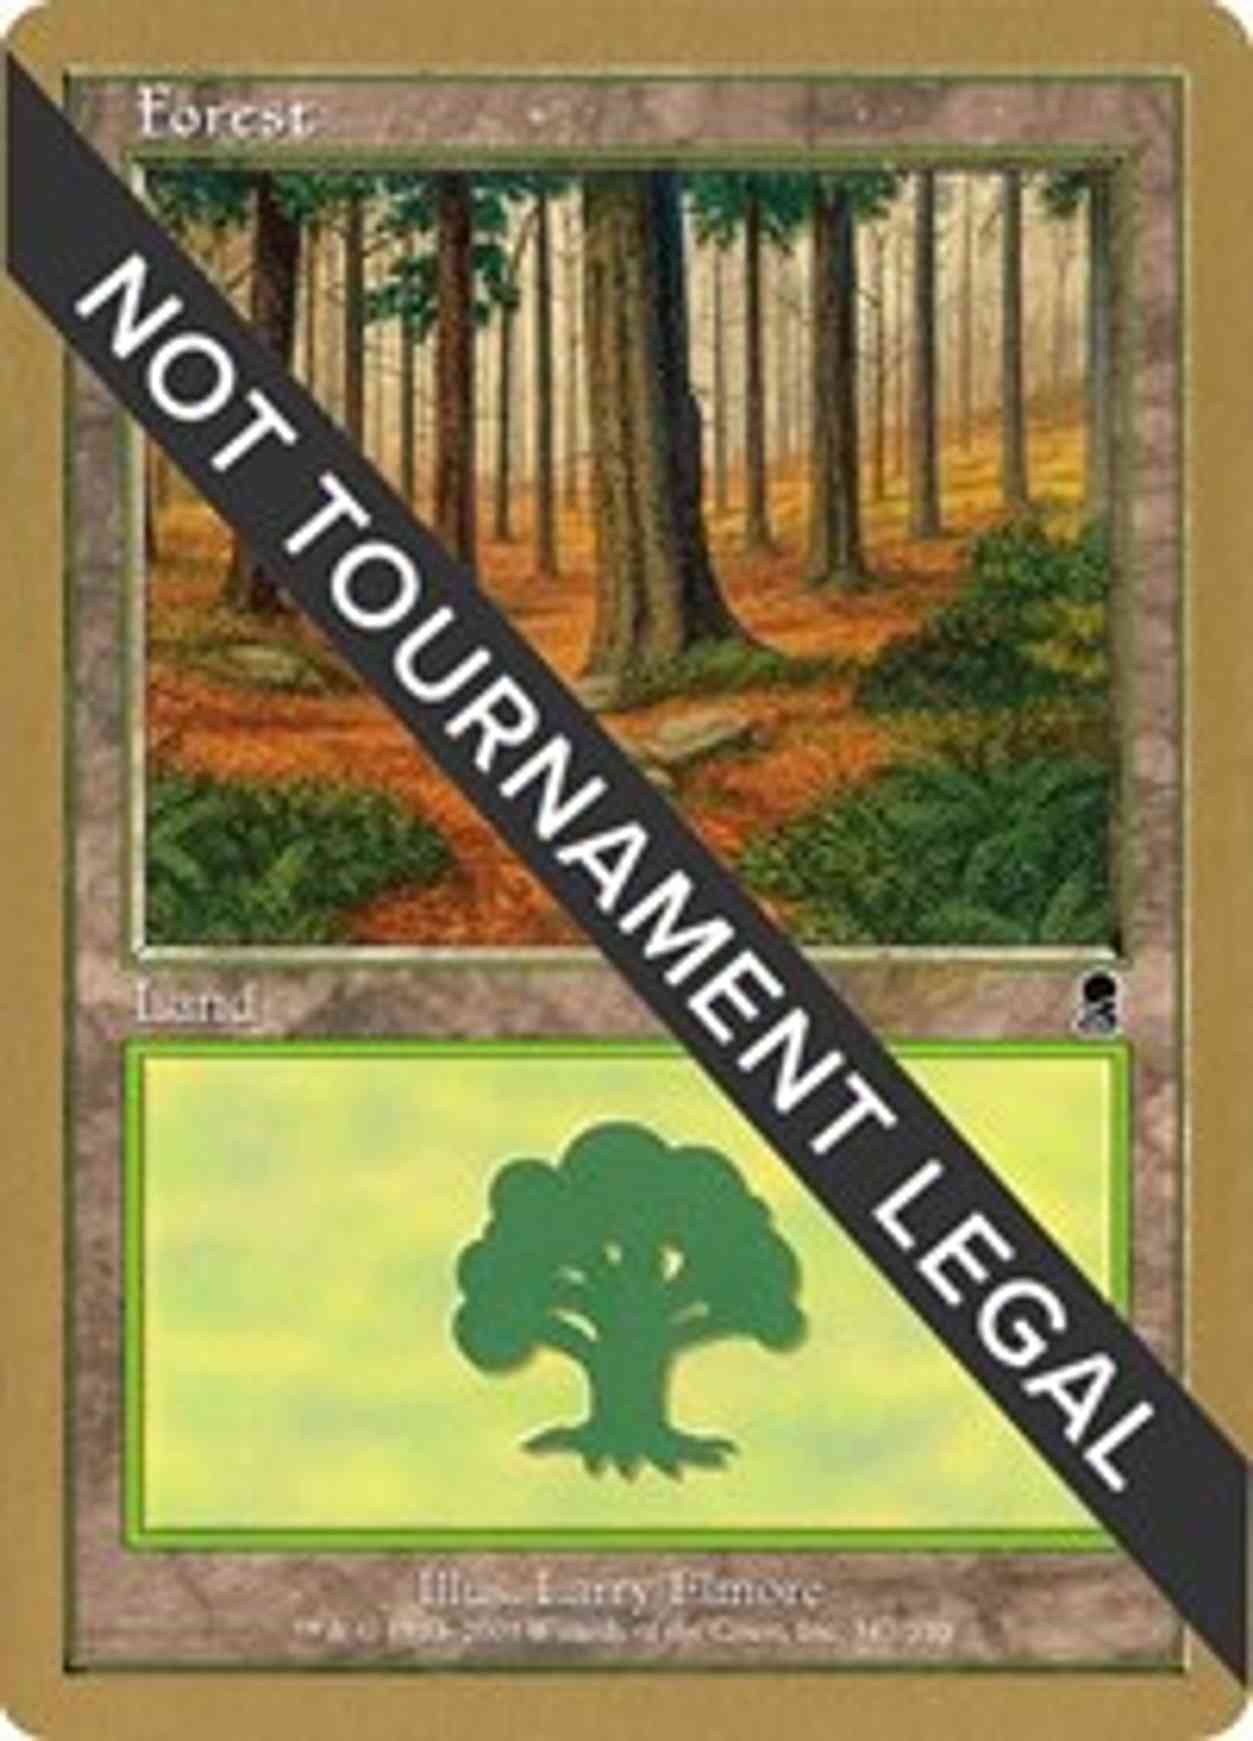 Forest (347) - 2002 Sim Han How (ODY) magic card front